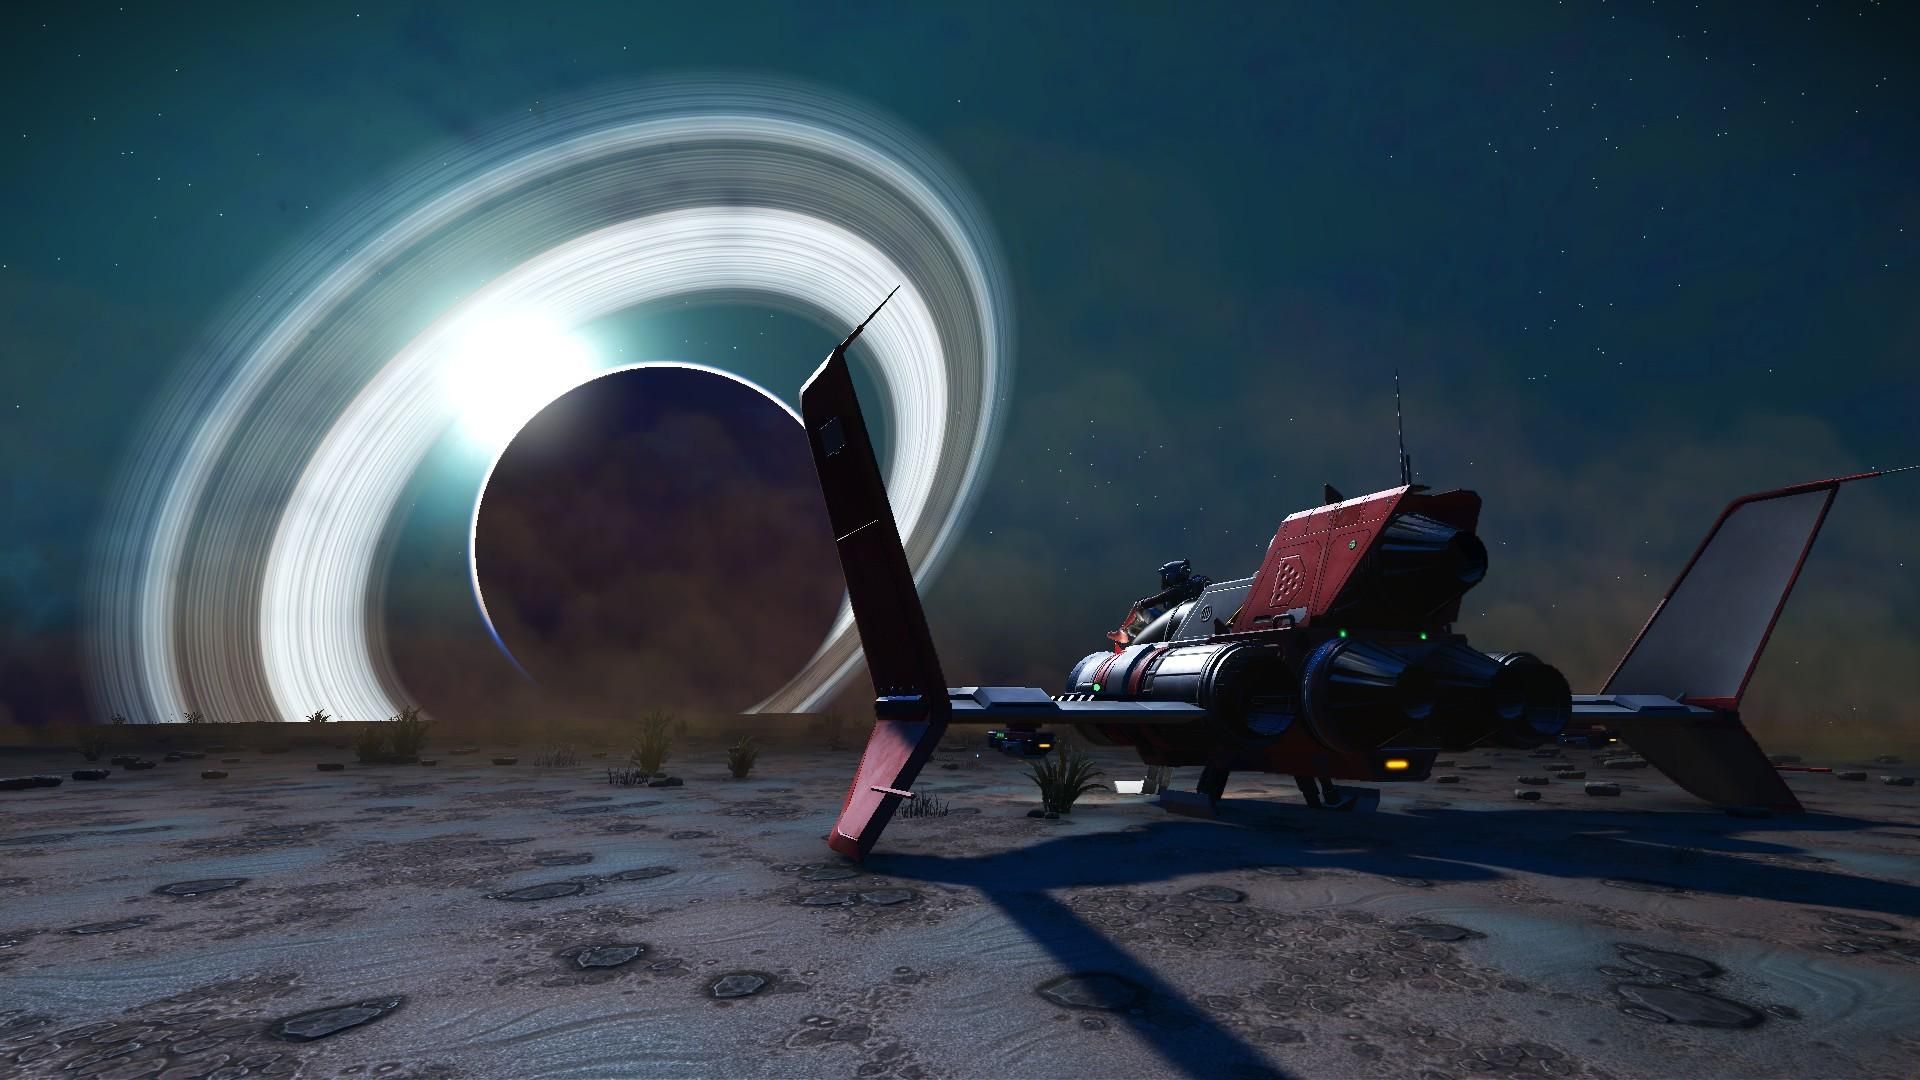 Amazing photos of space as captured in No Mans Sky image 24